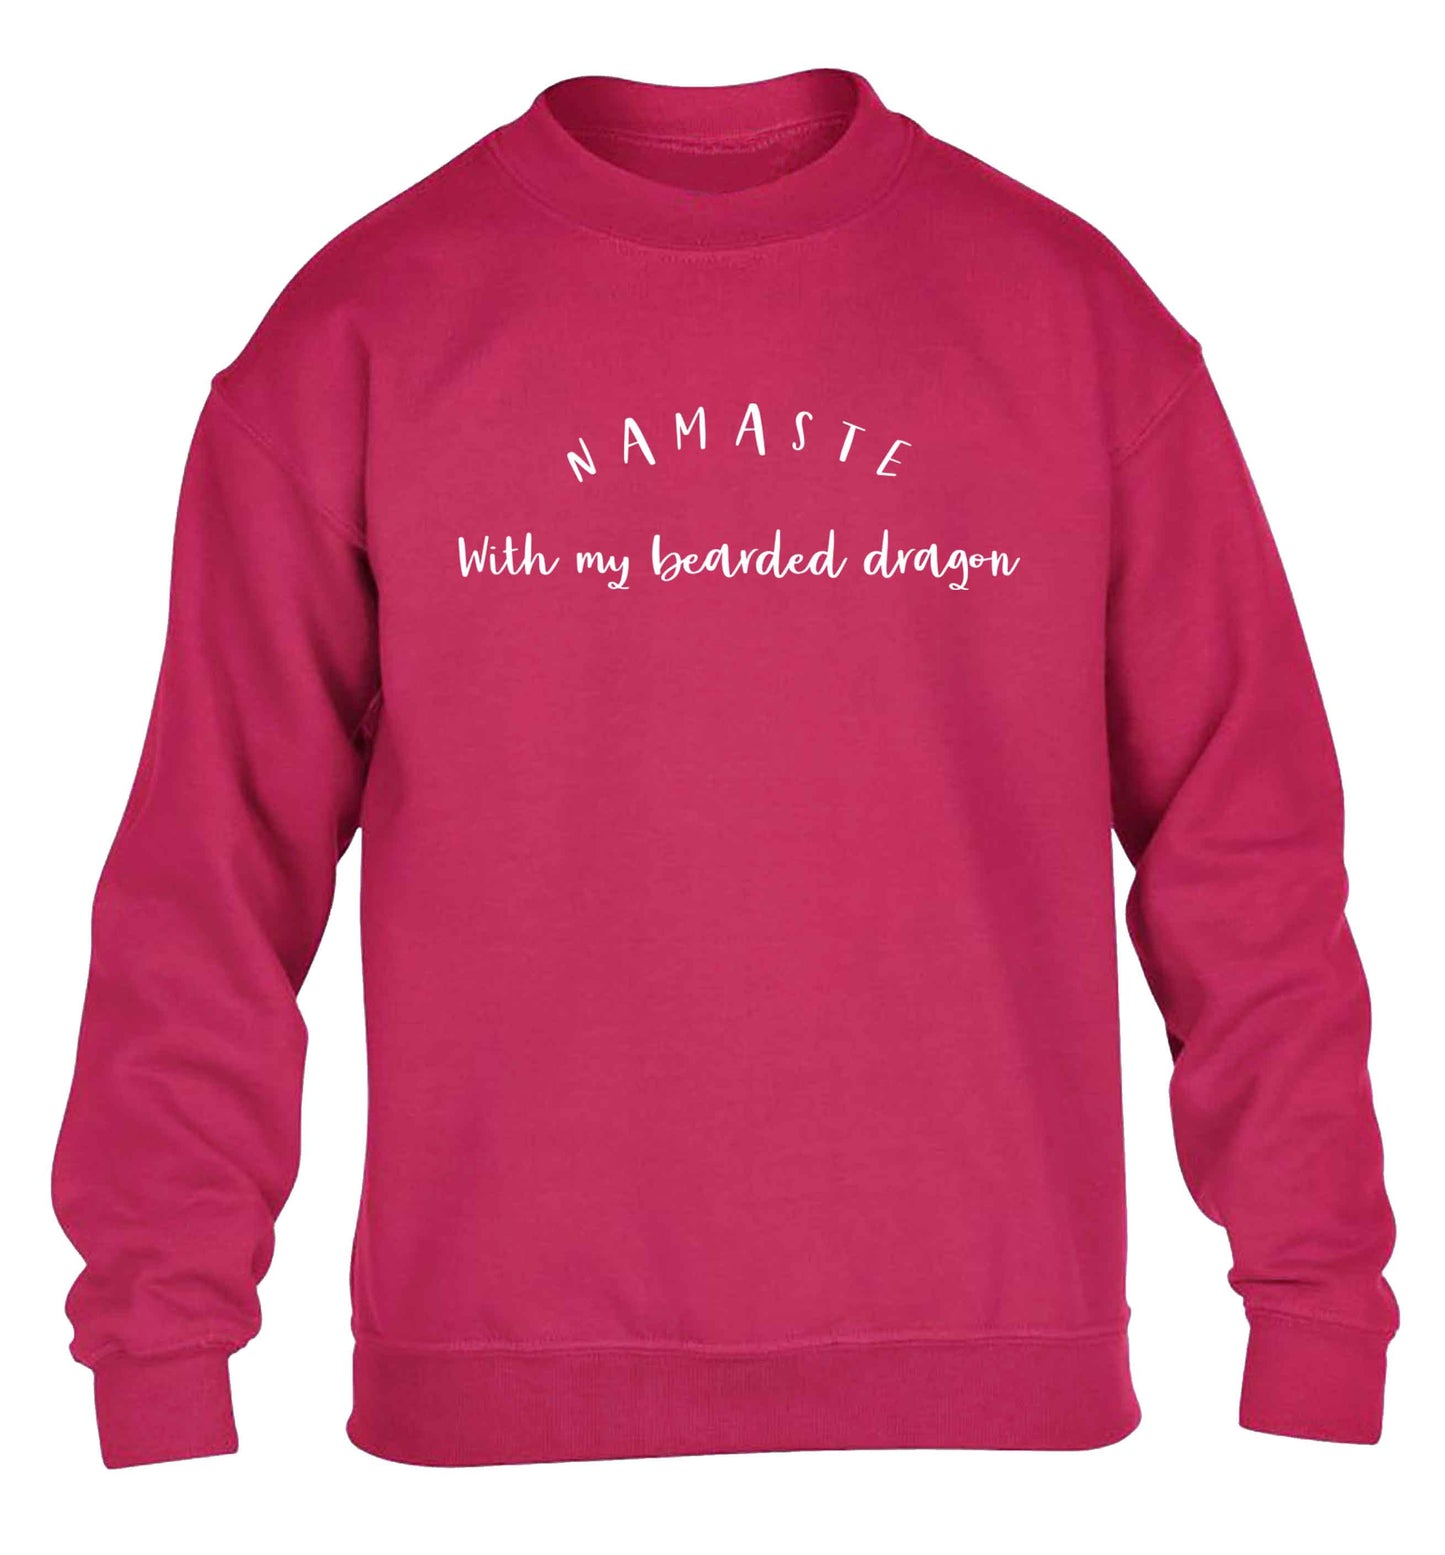 Namaste with my bearded dragon children's pink sweater 12-13 Years